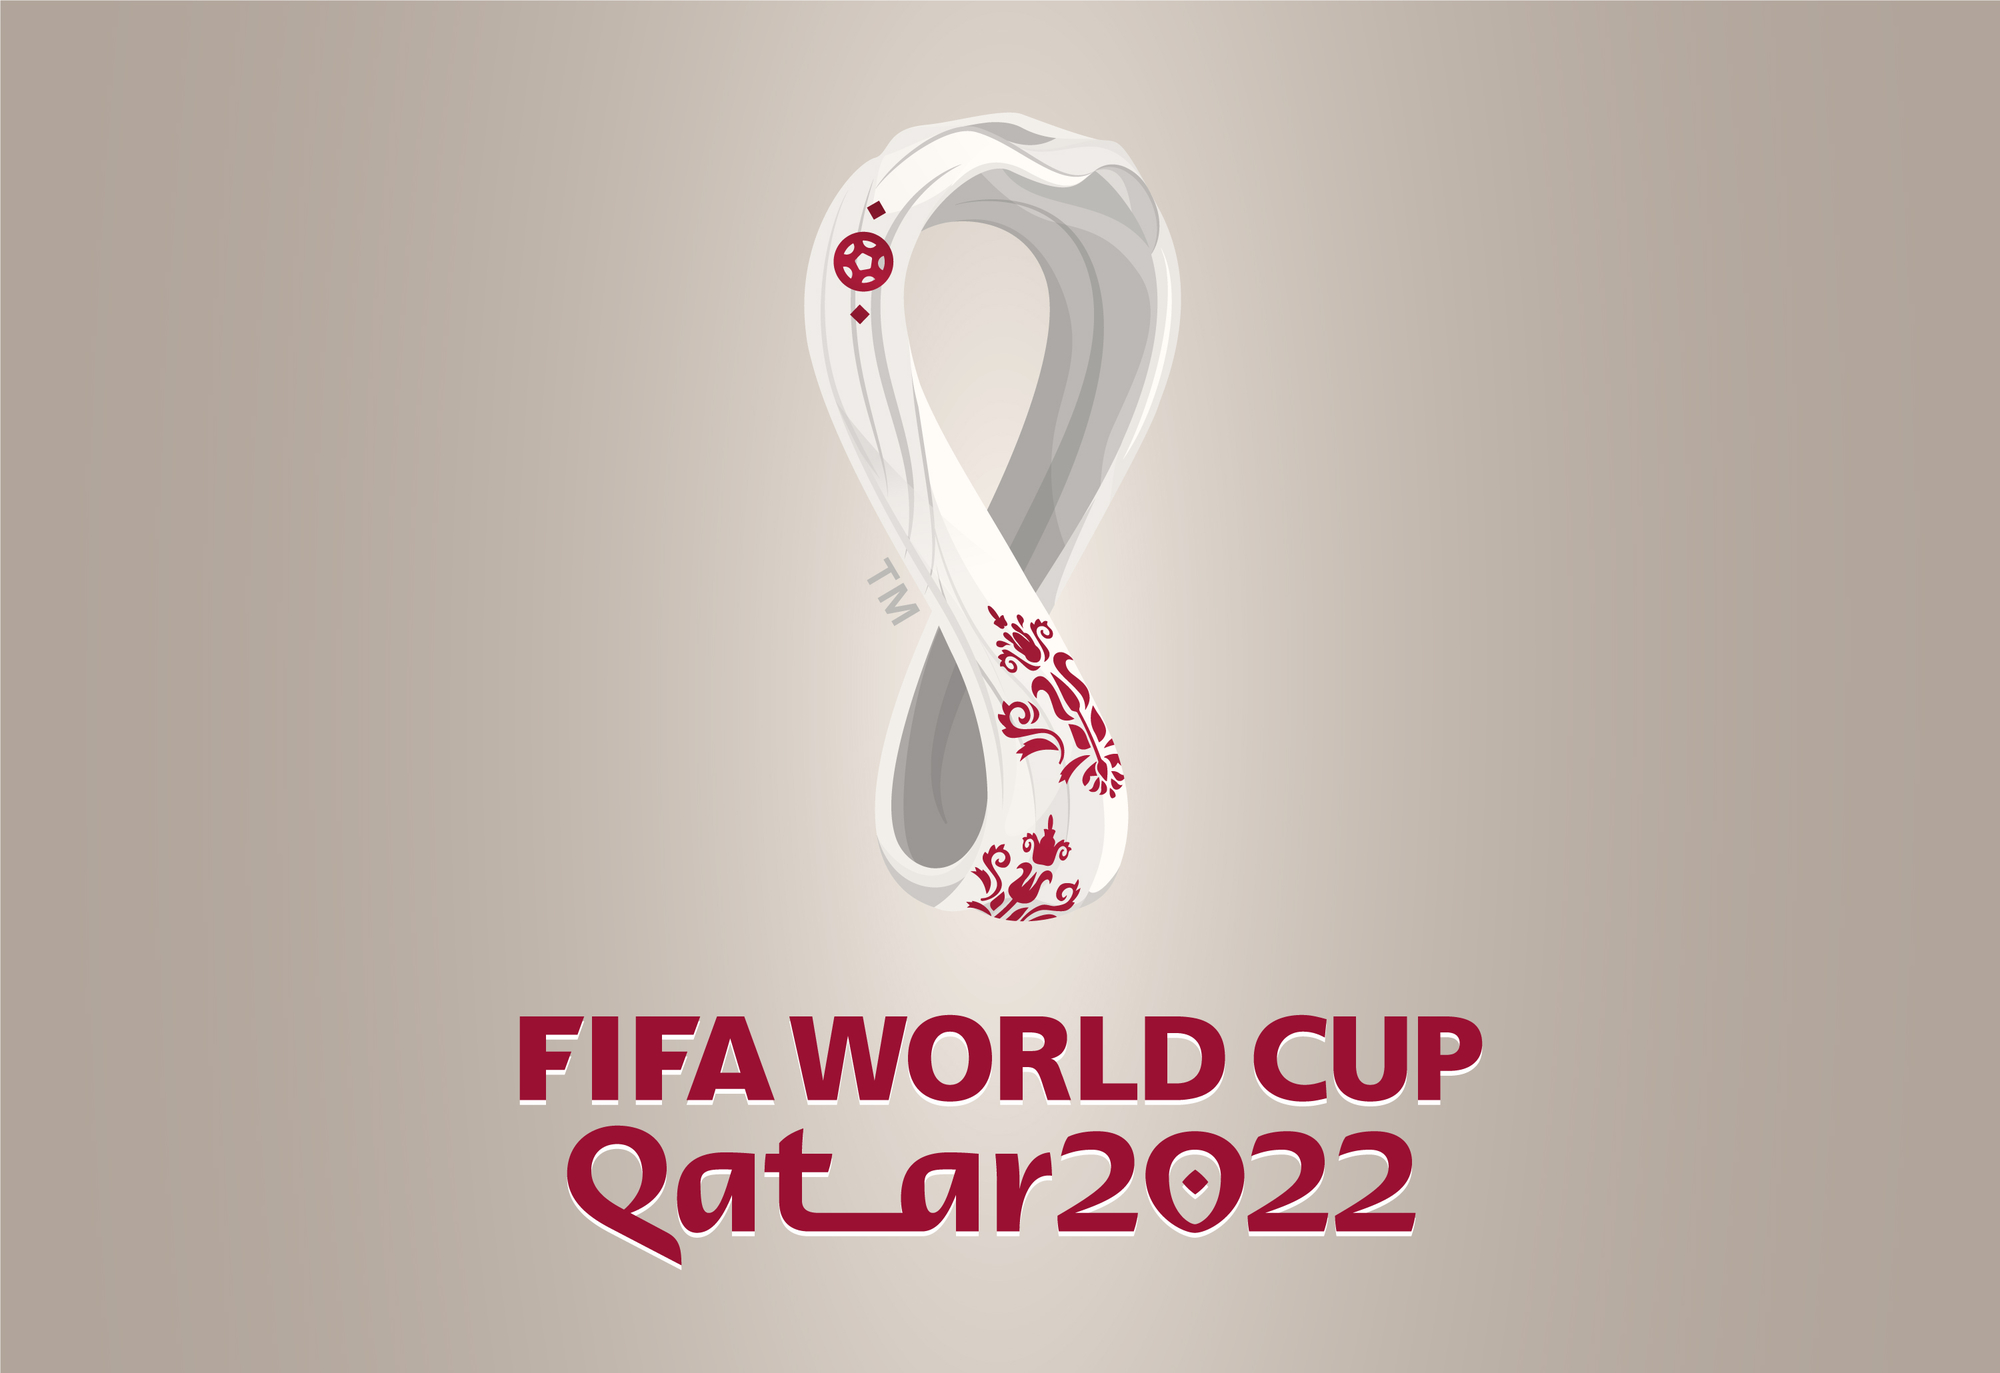 Qatar’s pandemic strategy to ensure safe 2022 World Cup